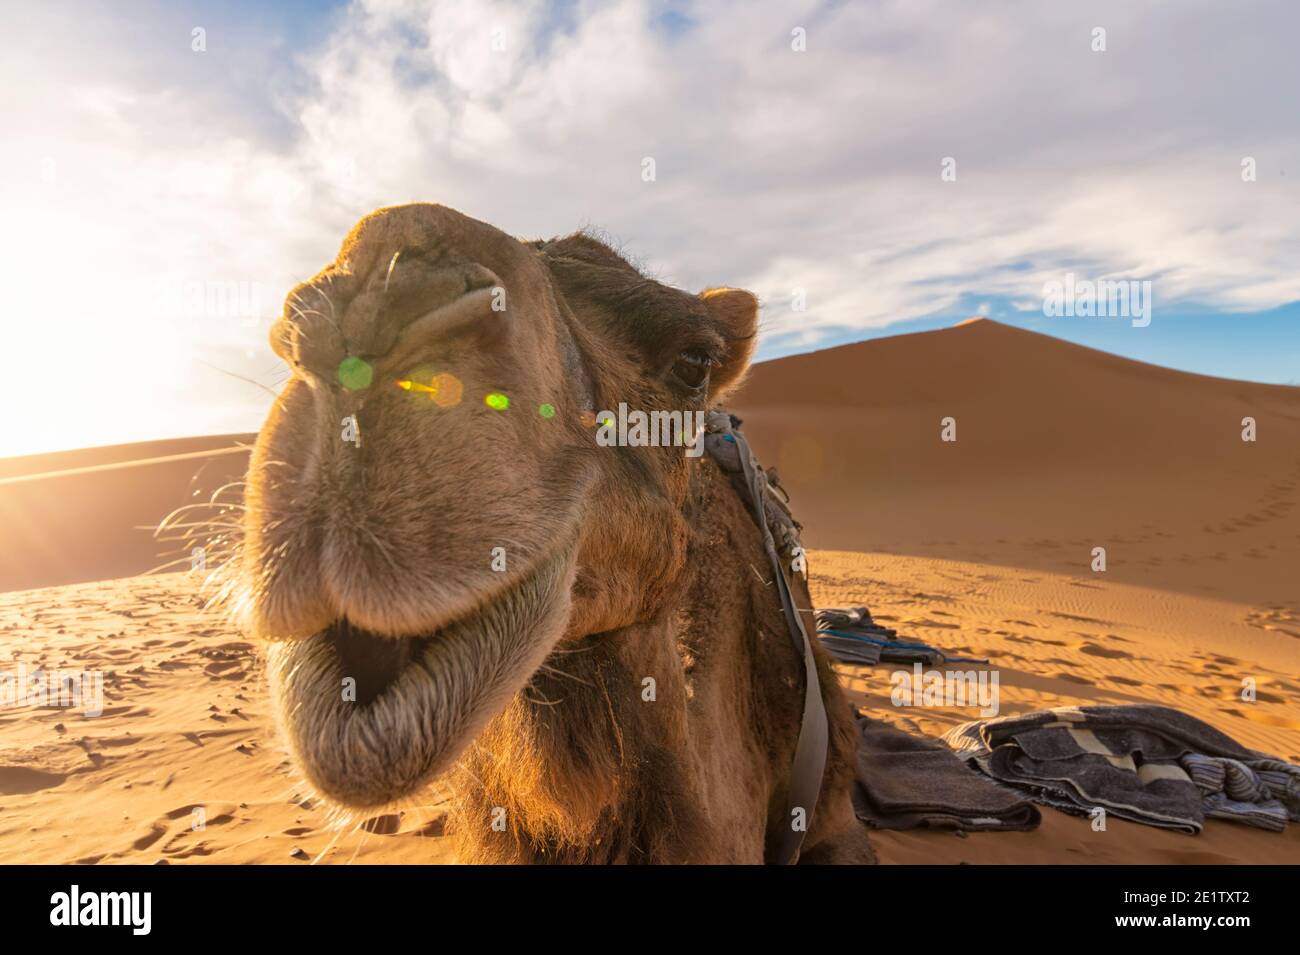 (Selective focus) Stunning view of a camel posing for a picture on the sand dunes of the Merzouga desert at sunset. Merzouga, Morocco. Stock Photo